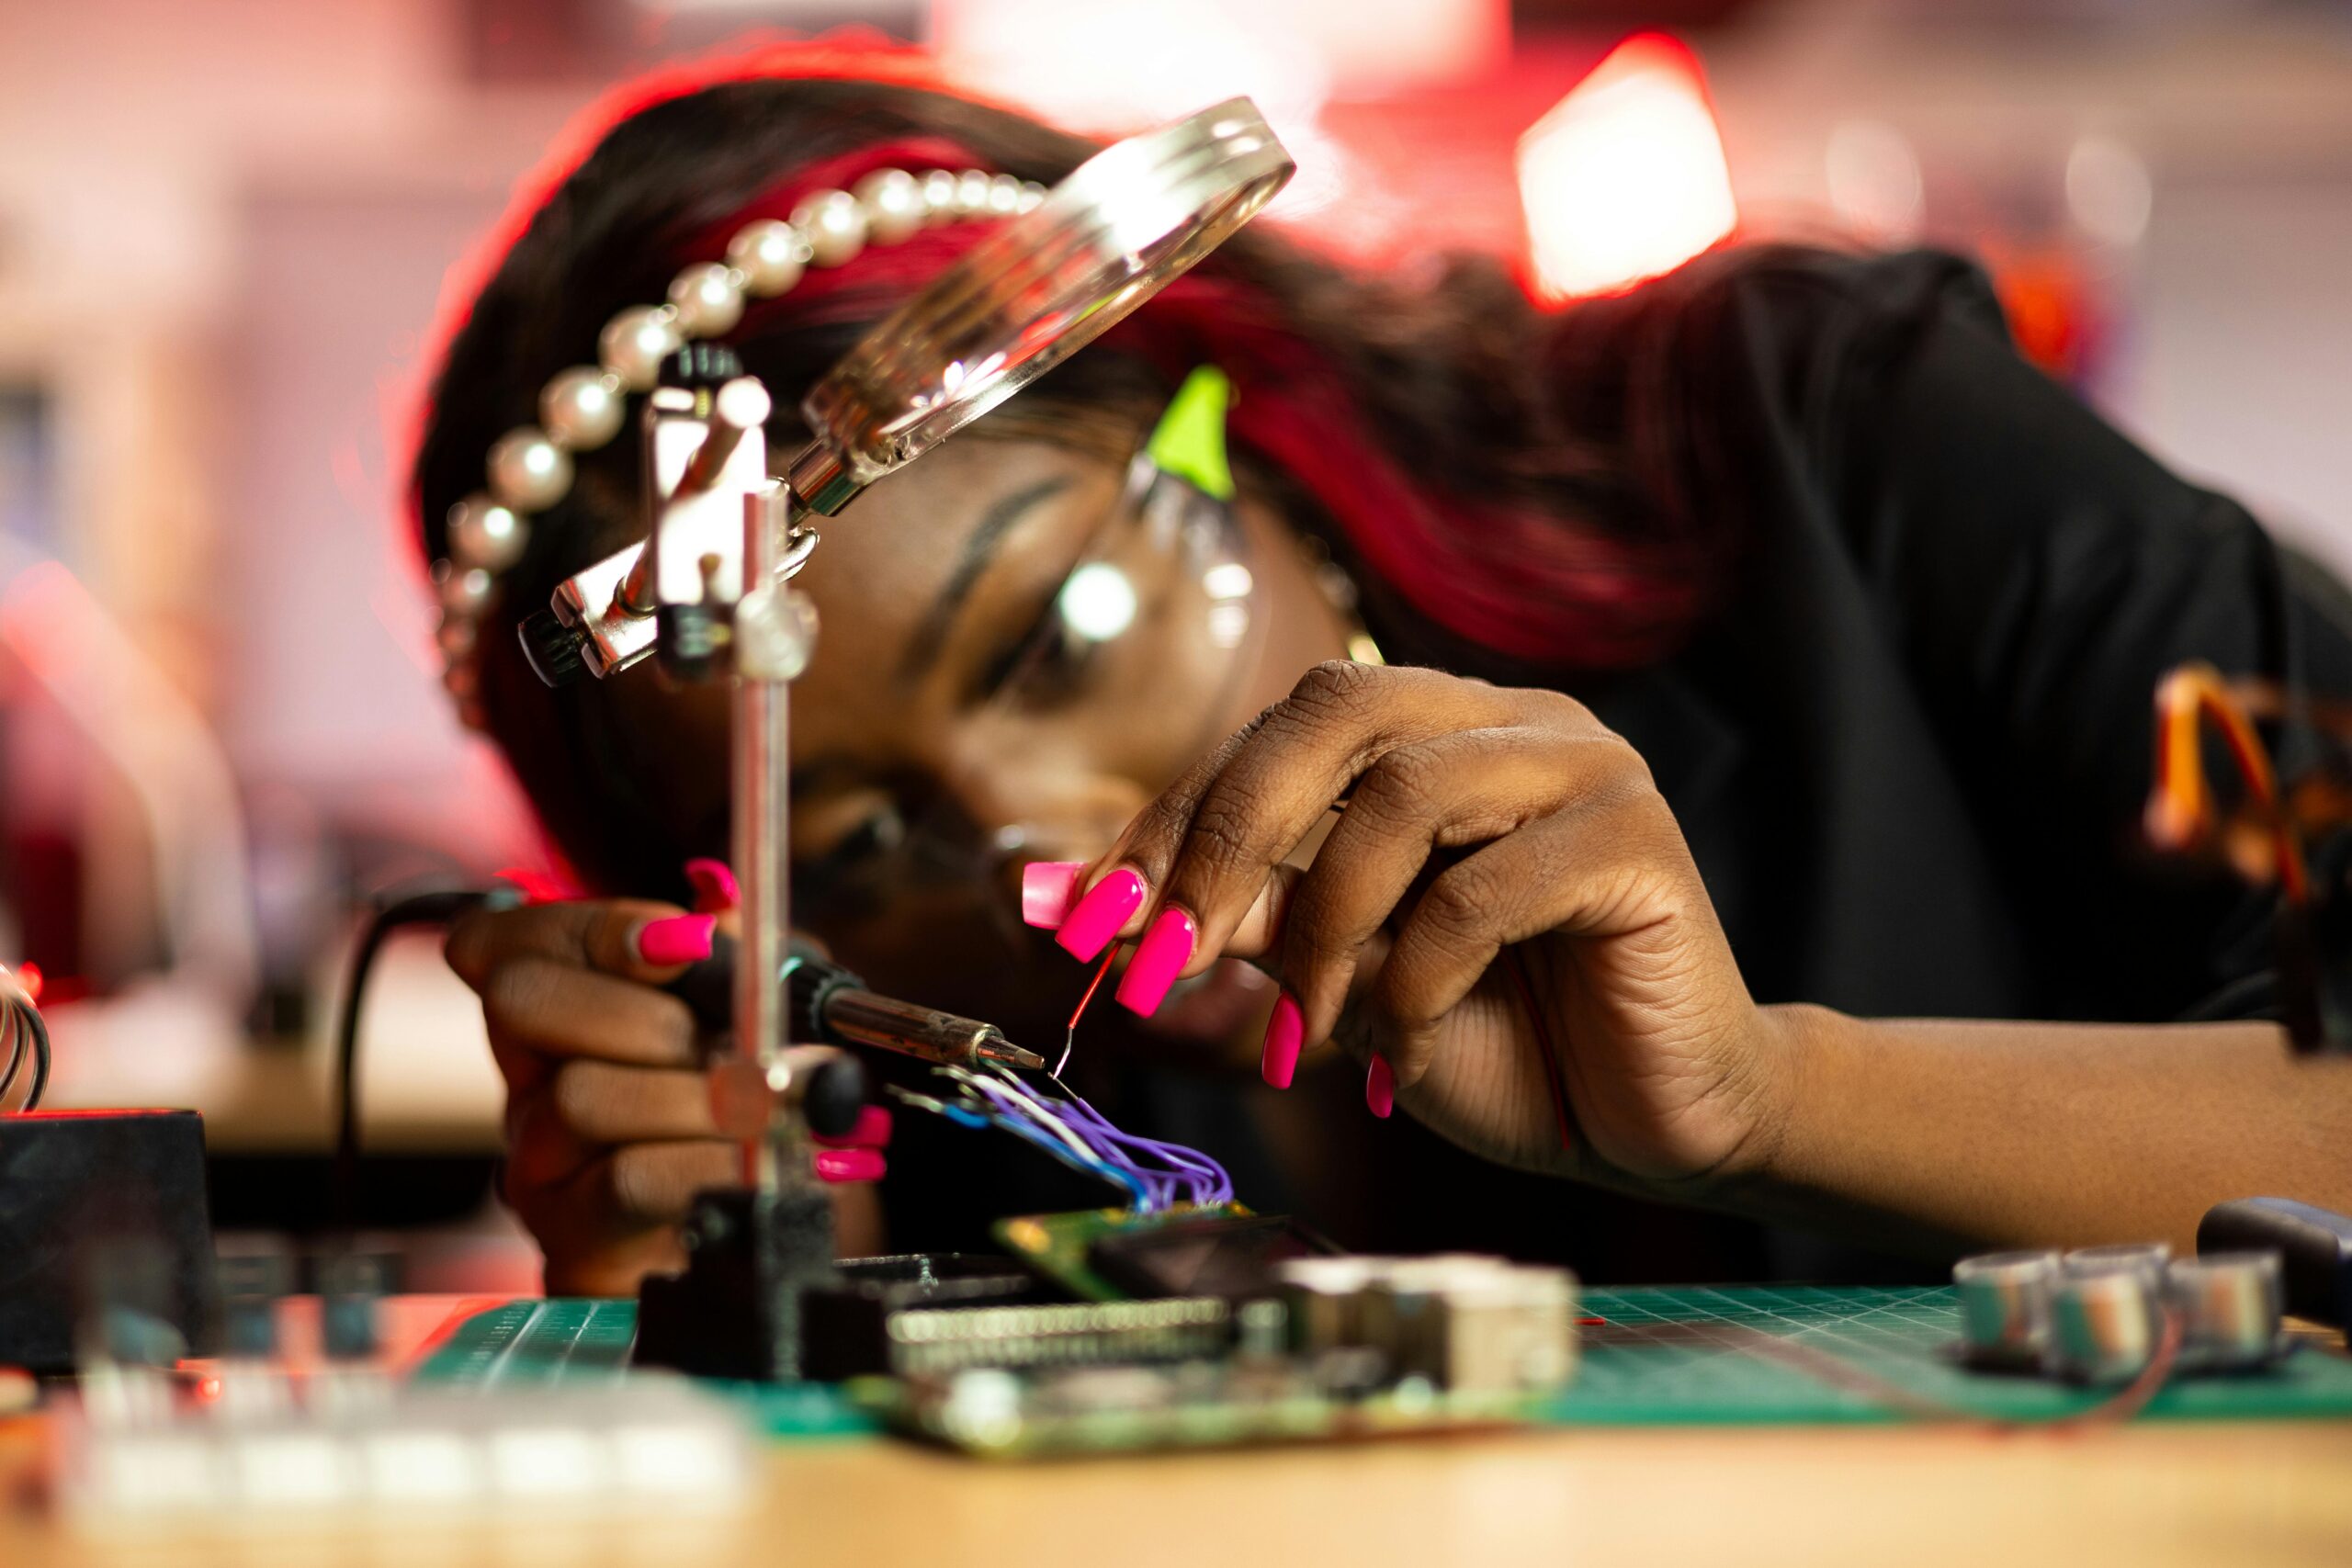 A woman of color assembling a micro computer